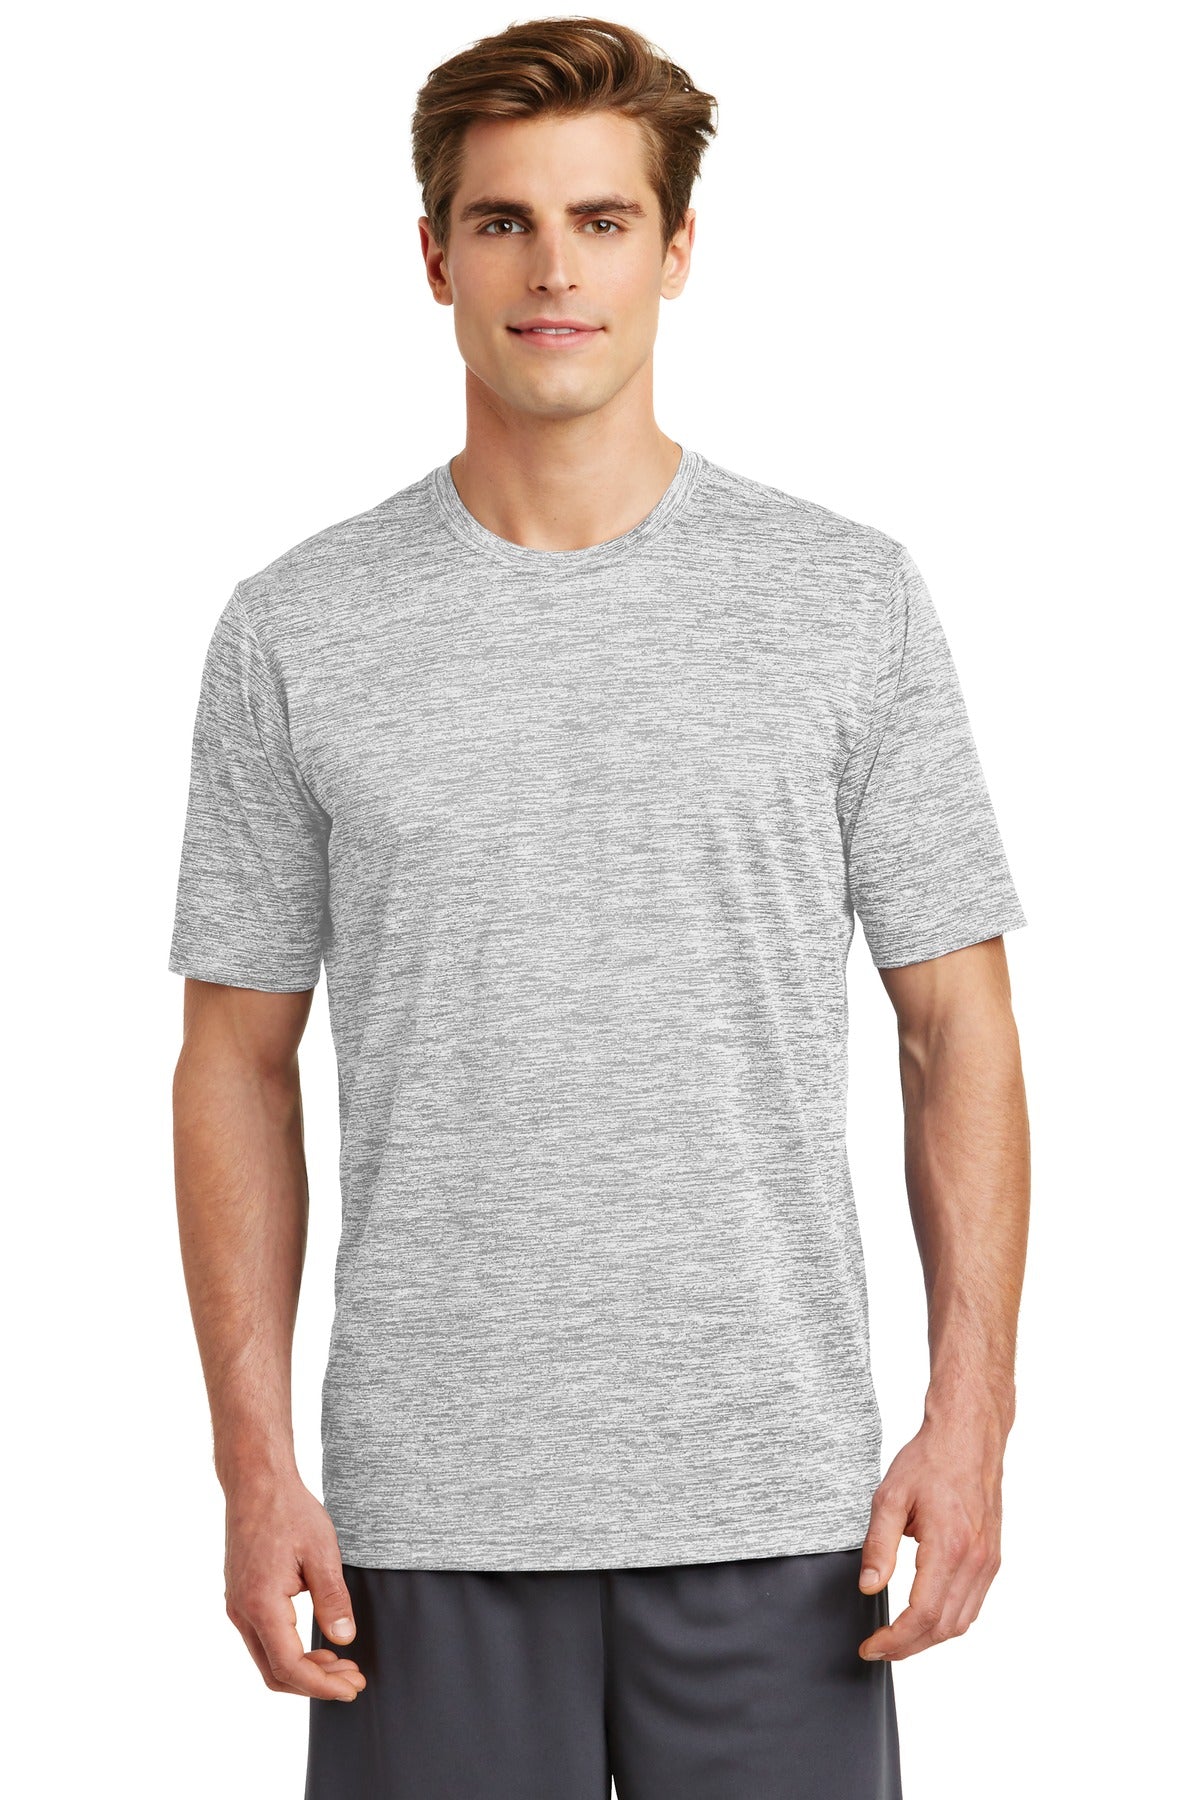 Sport-Tek® PosiCharge® Electric Heather Tee. ST390 [Silver Electric] - DFW Impression